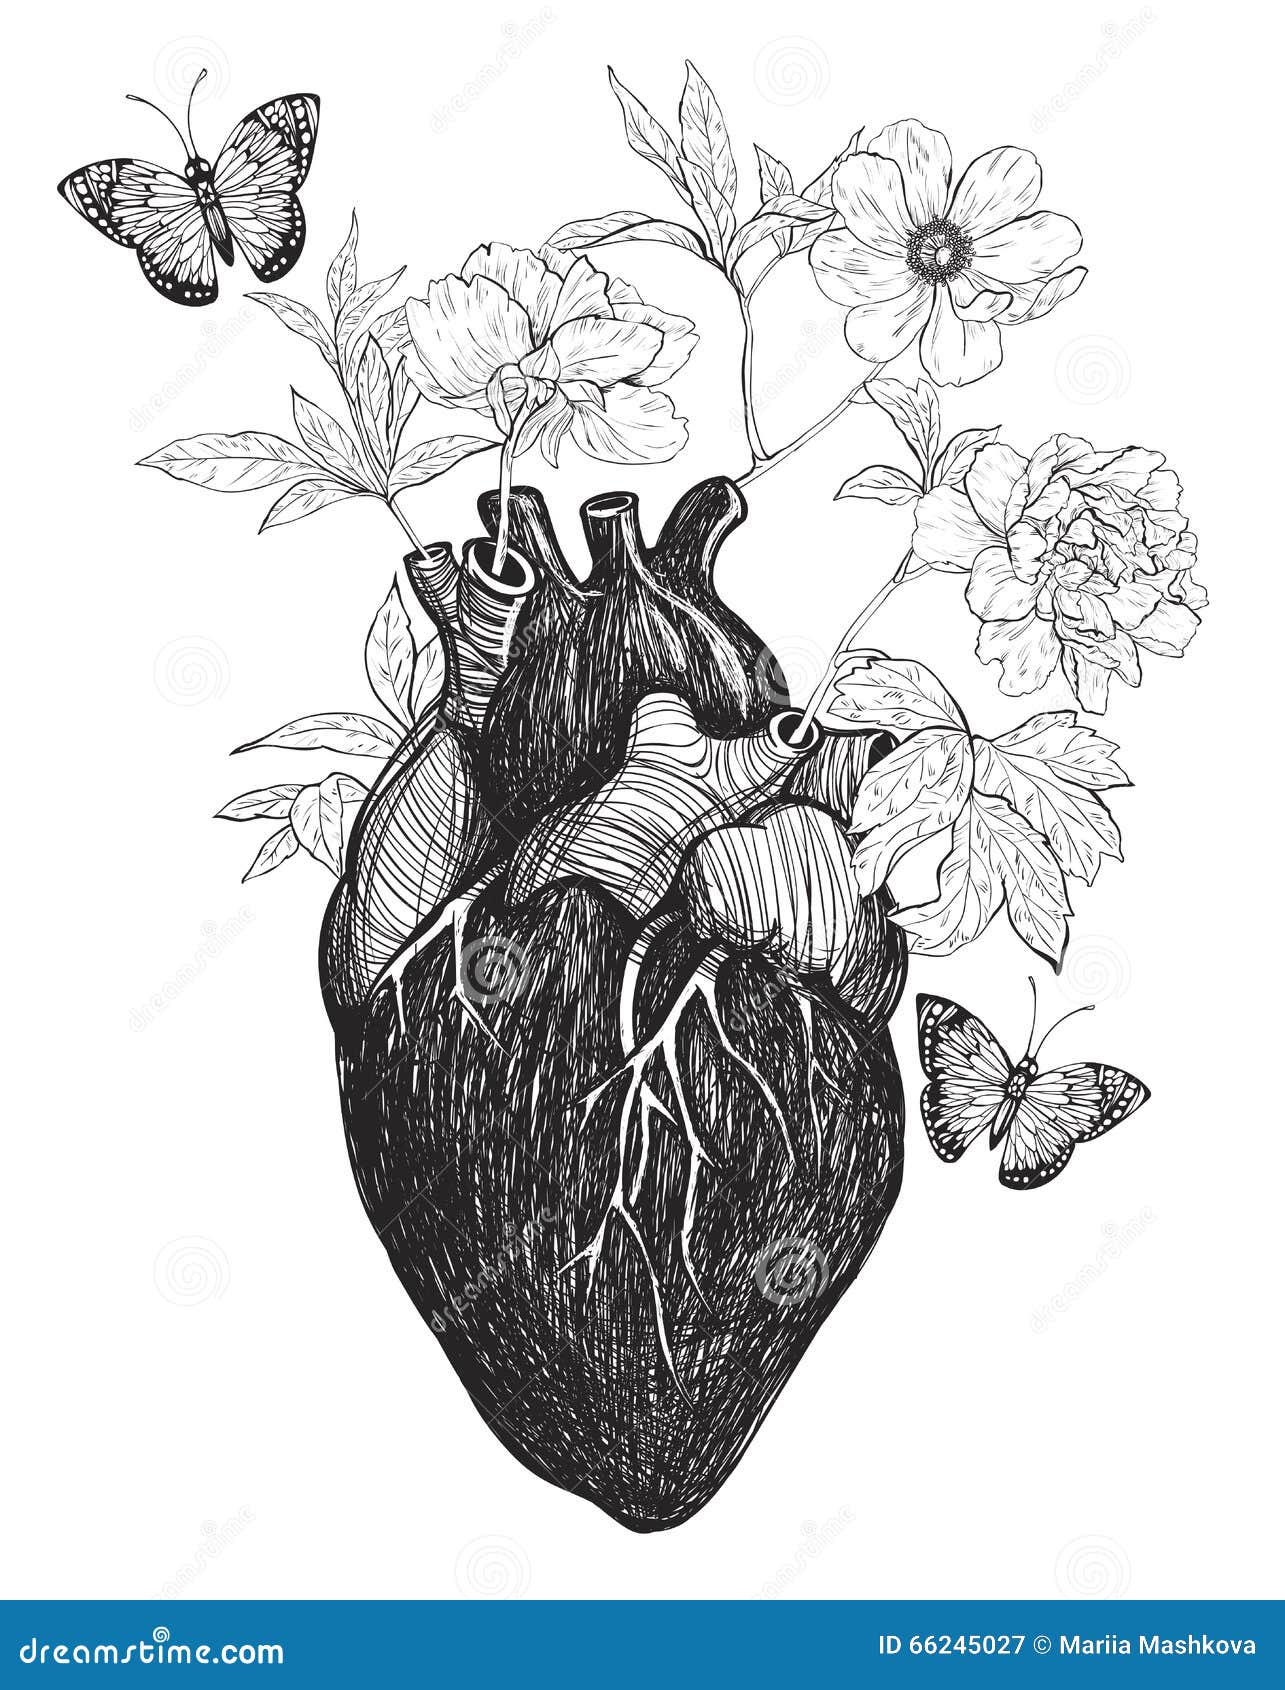 human anatomical heart whith flowers.